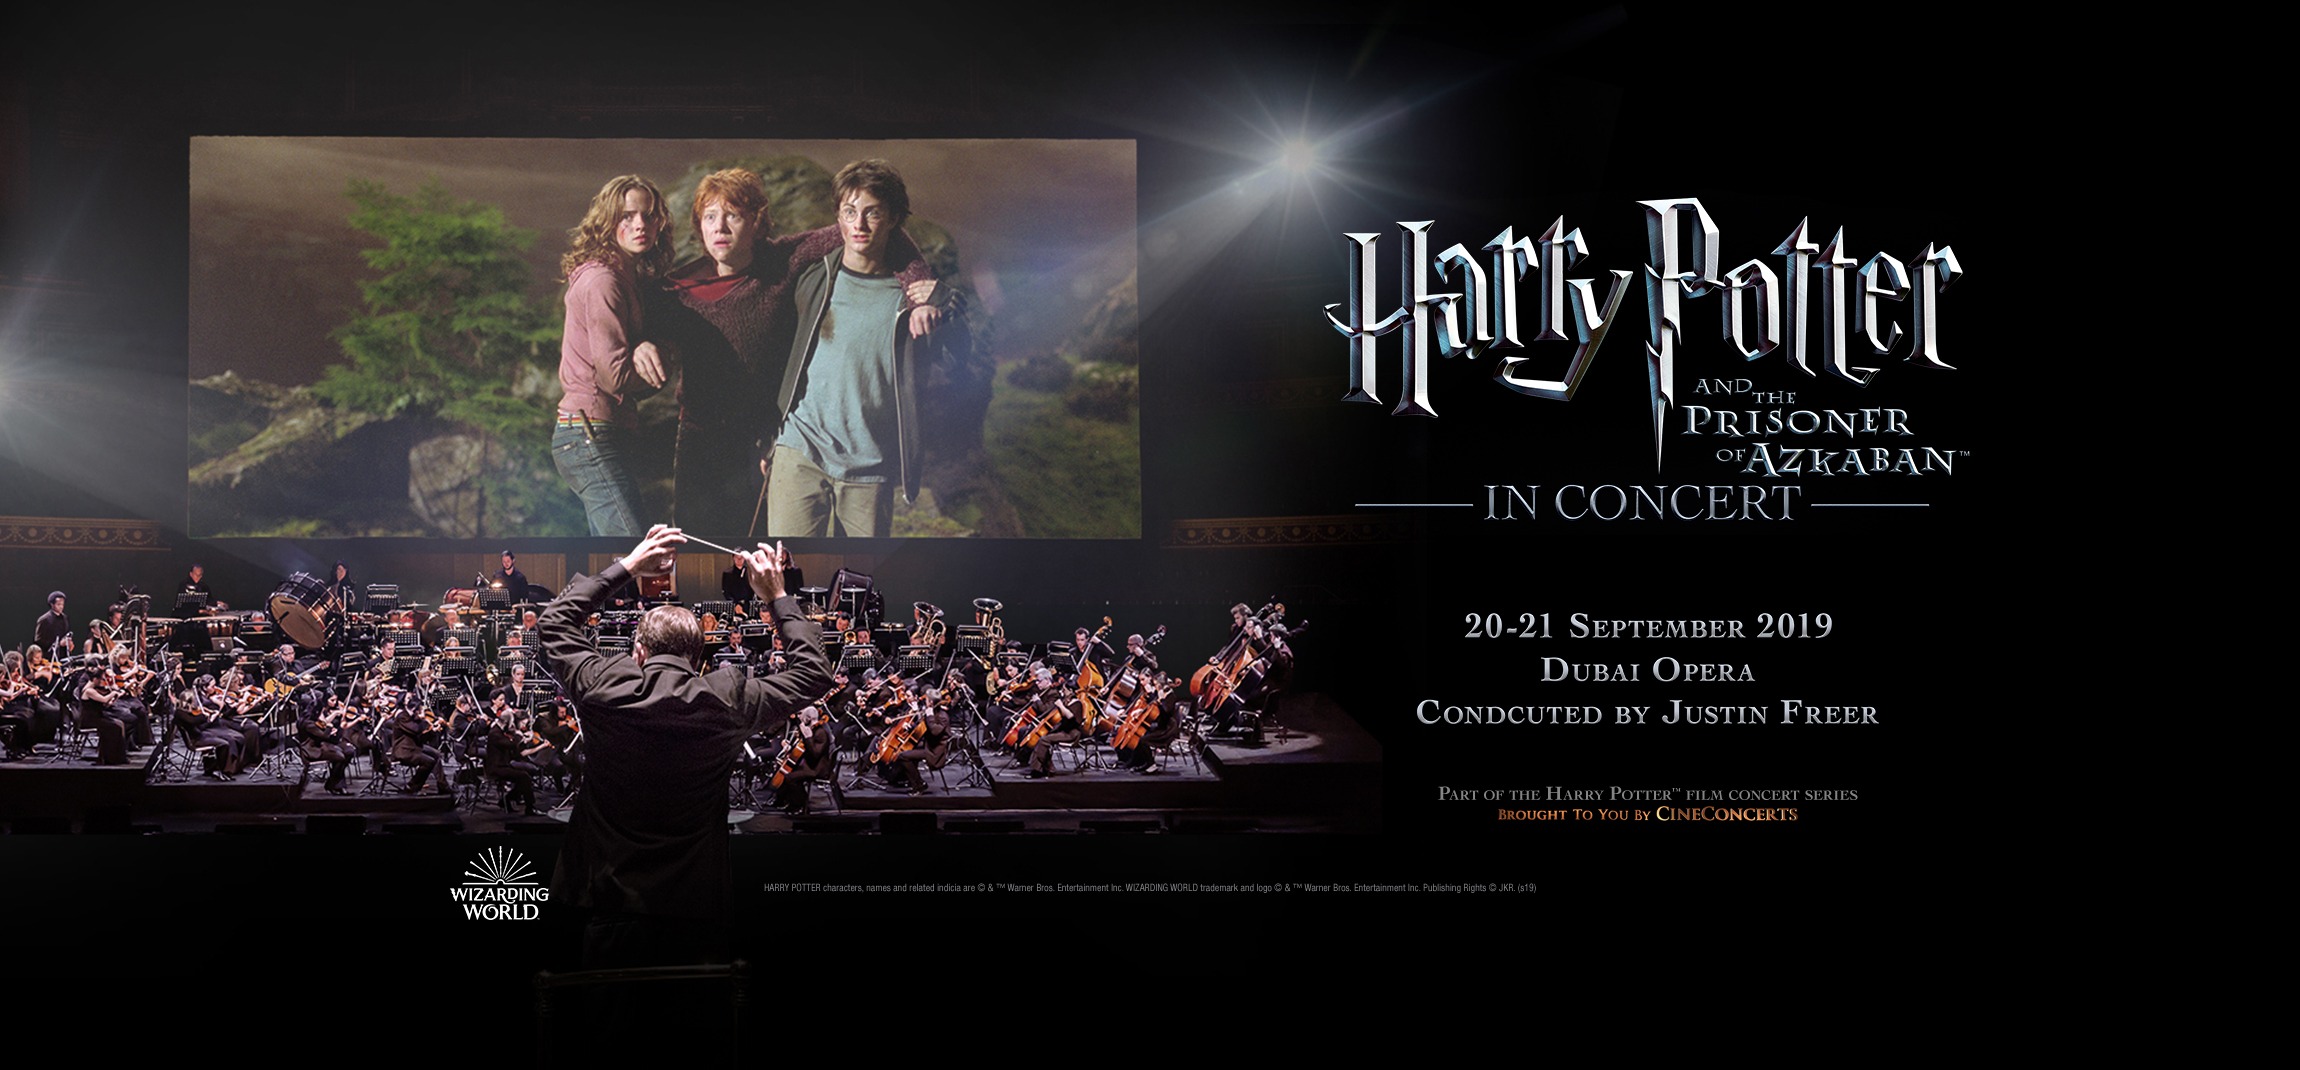 Harry Potter and the Prisoner of Azkaban in Concert - Coming Soon in UAE